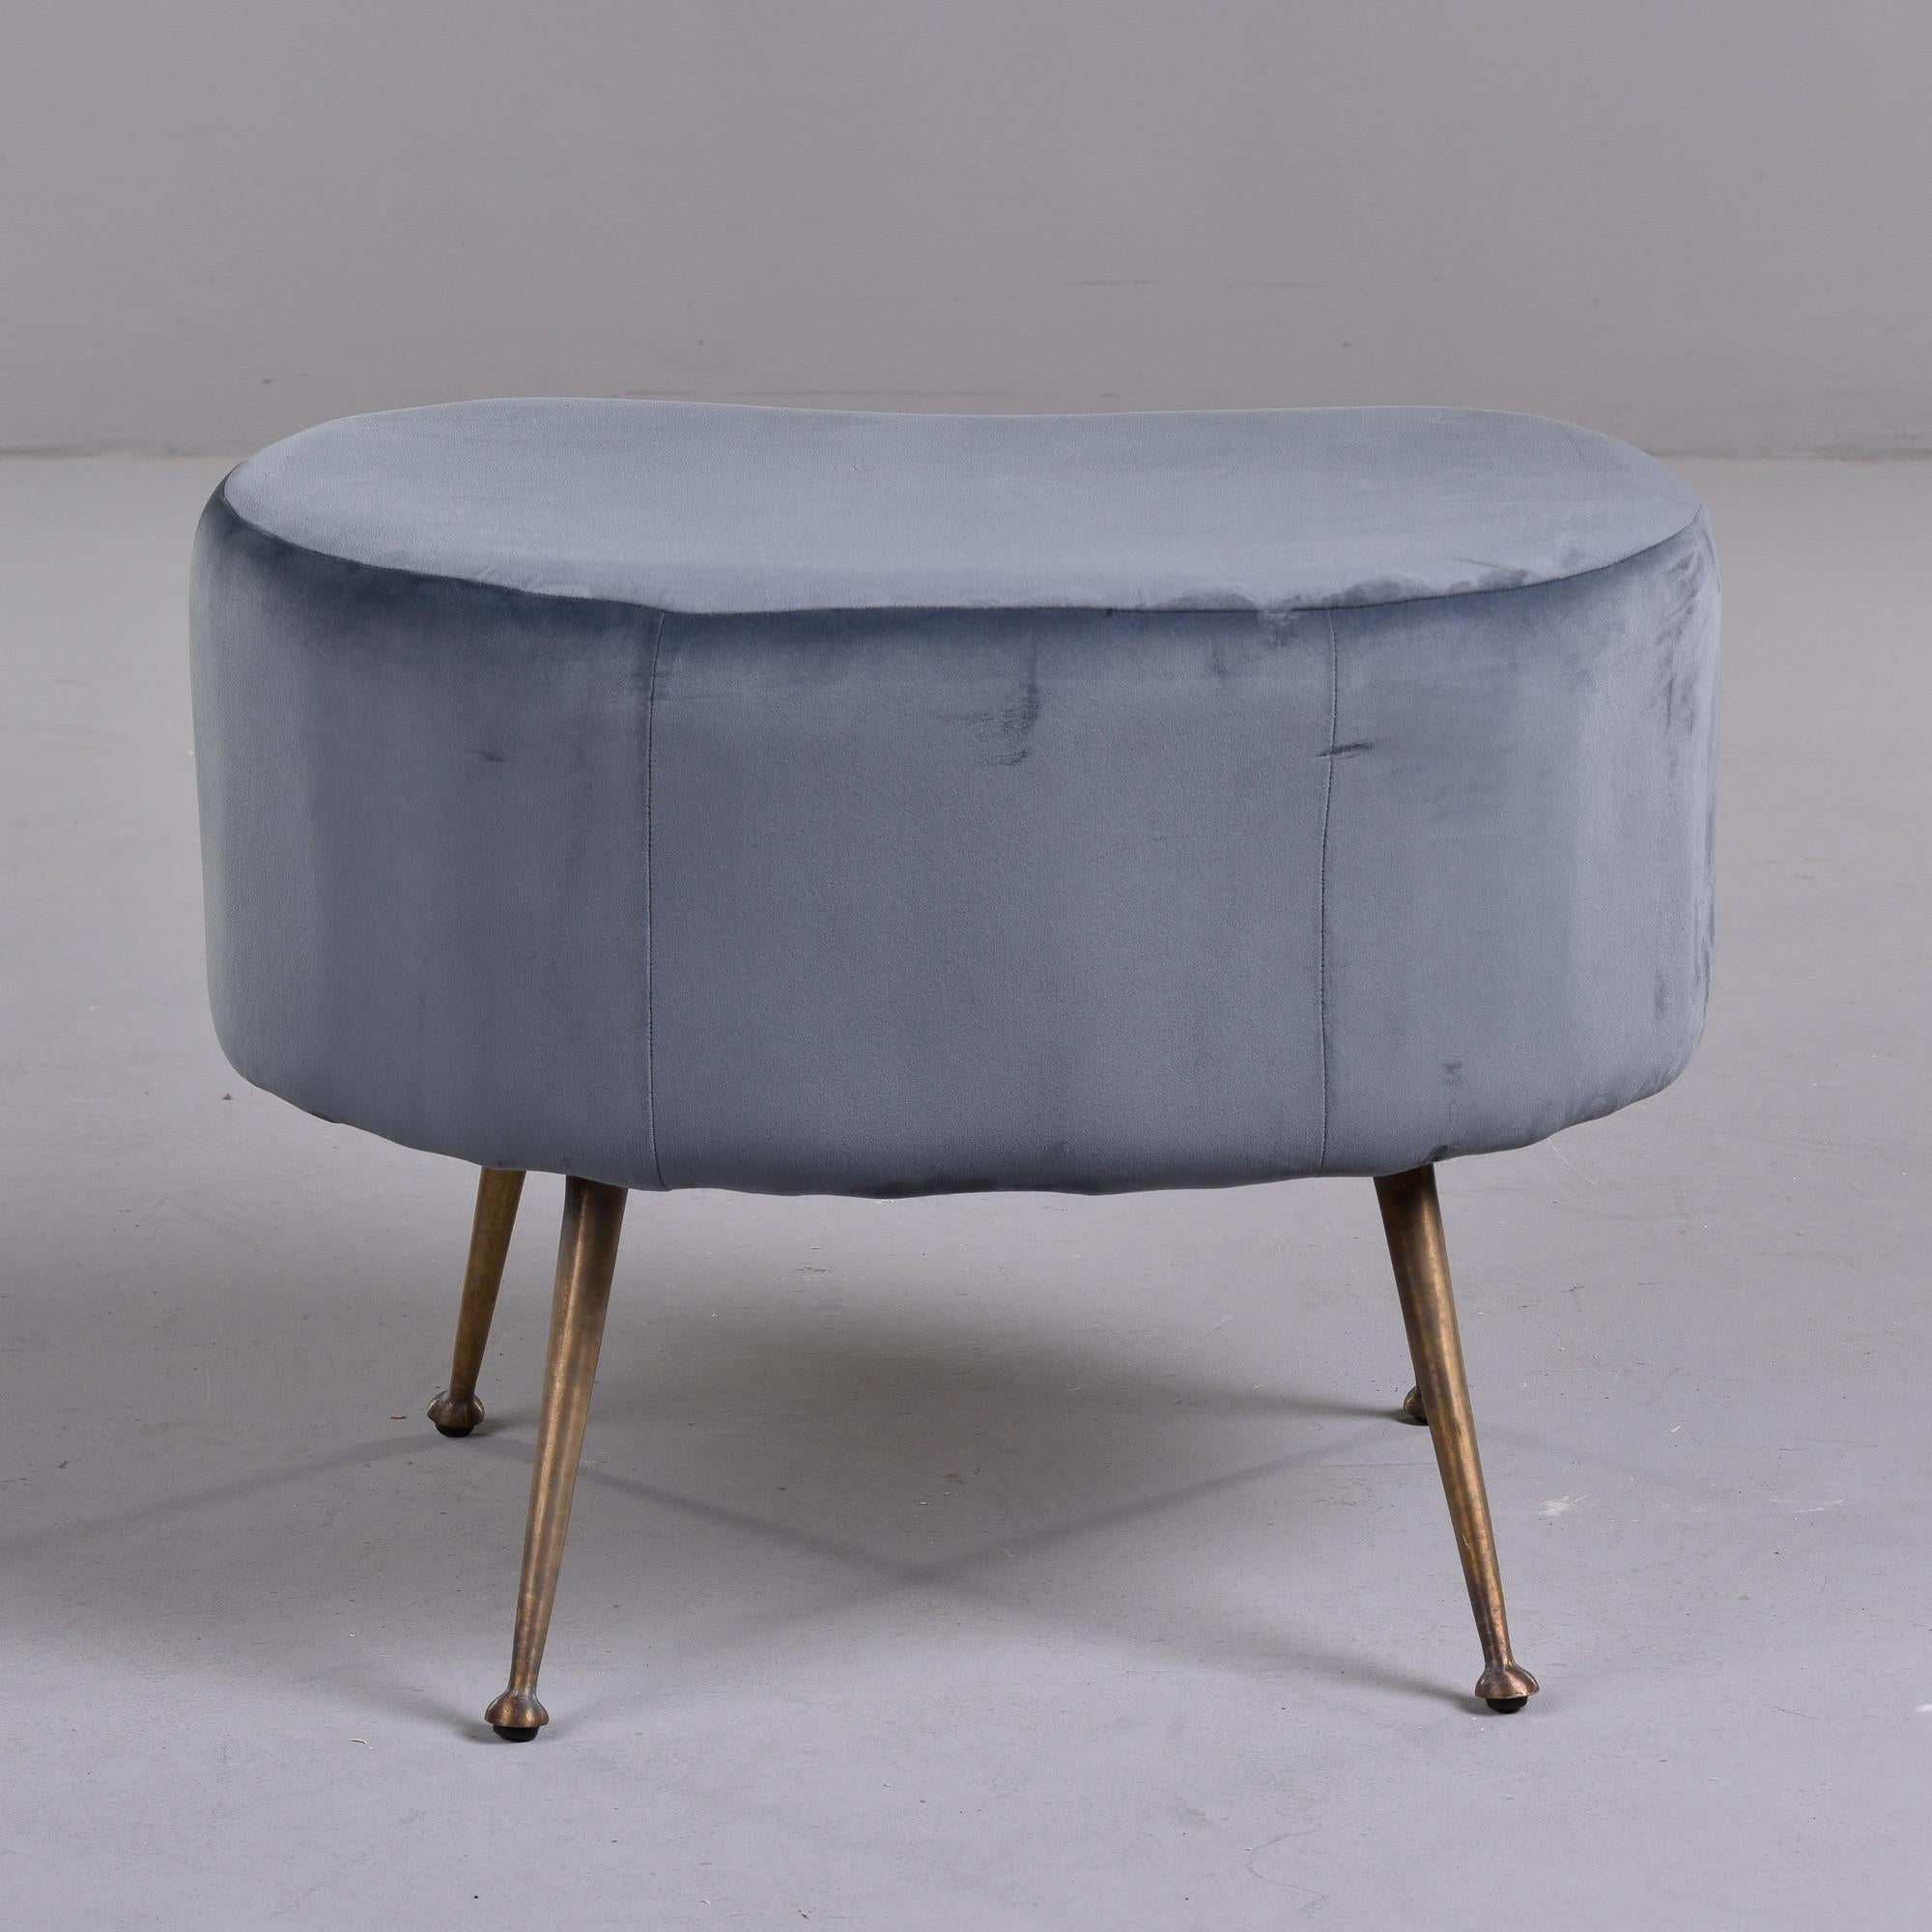 Circa late 1950s / early 1960s Italian kidney shaped stool with slender brass legs and newer pale gray velvet upholstery. Unknown maker. Two stools available at the time of this posting. Sold and priced individually.